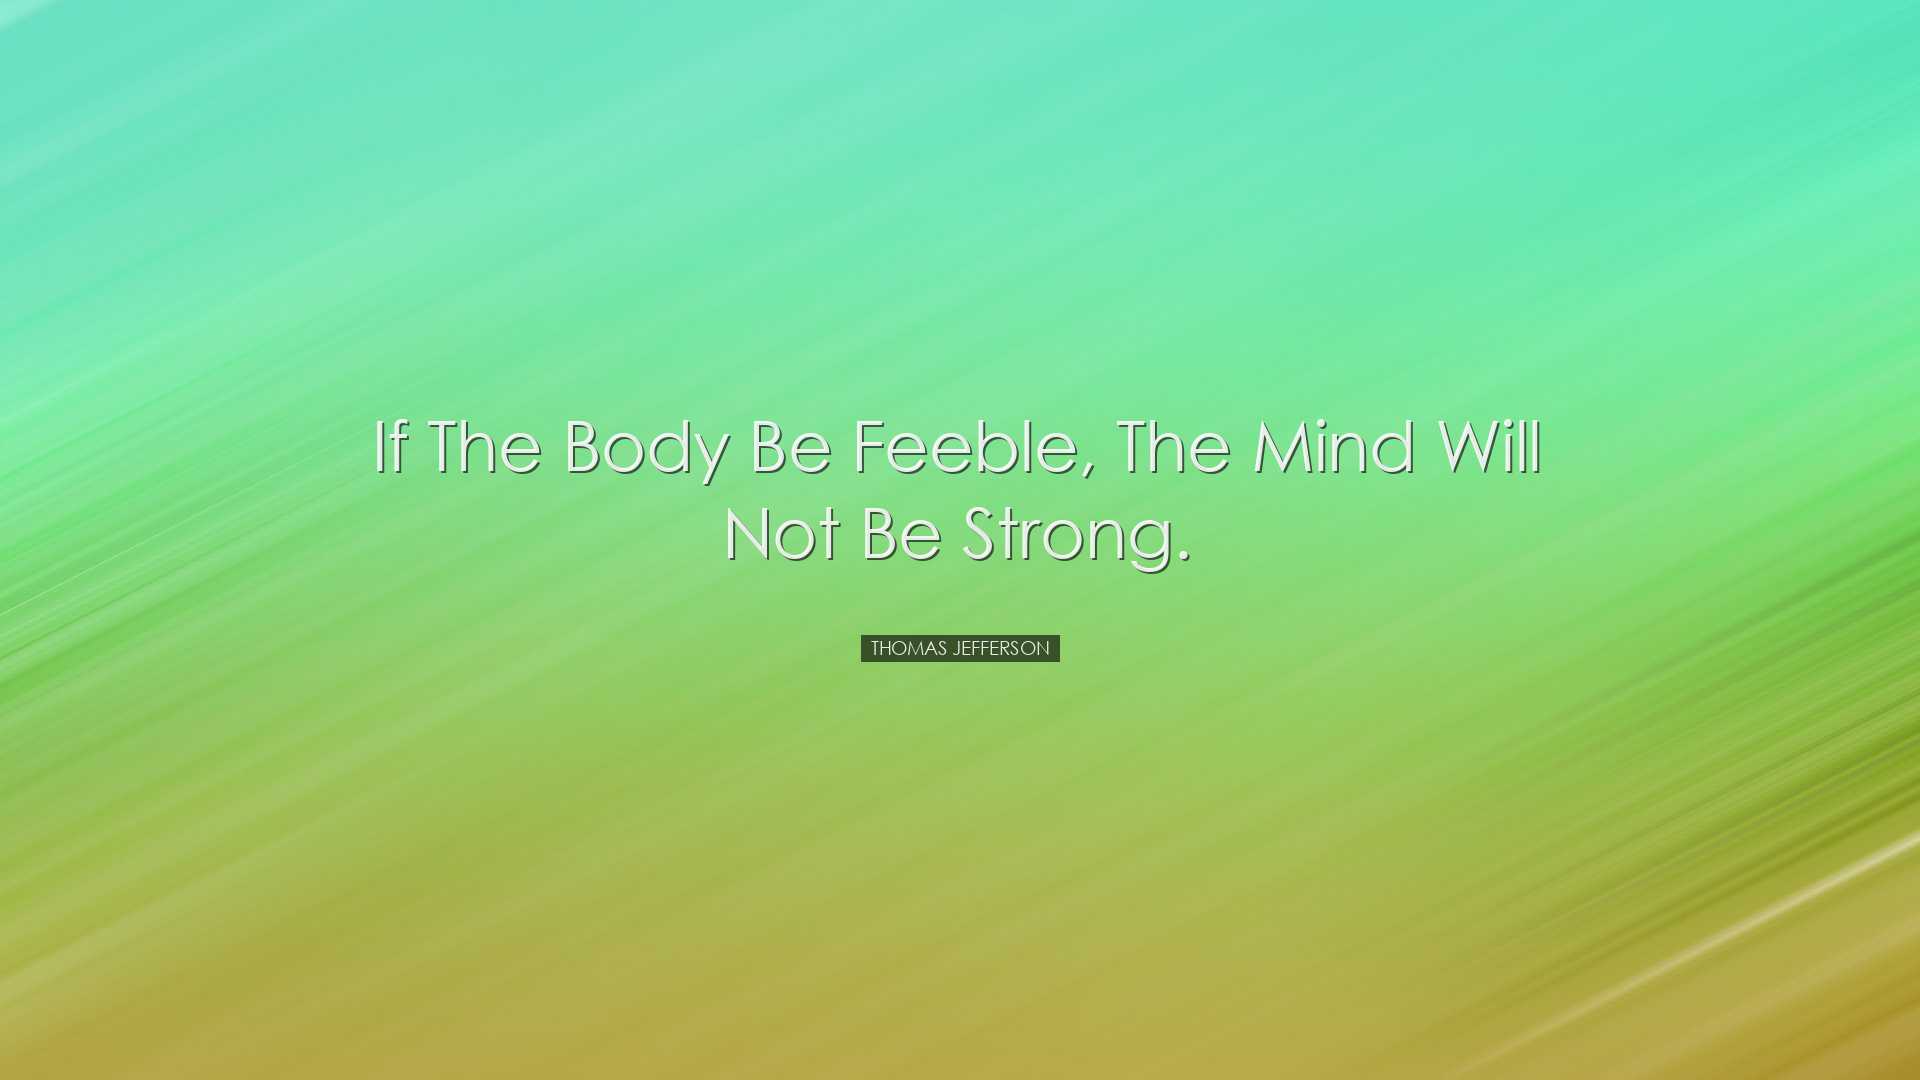 If the body be feeble, the mind will not be strong. - Thomas Jeffe